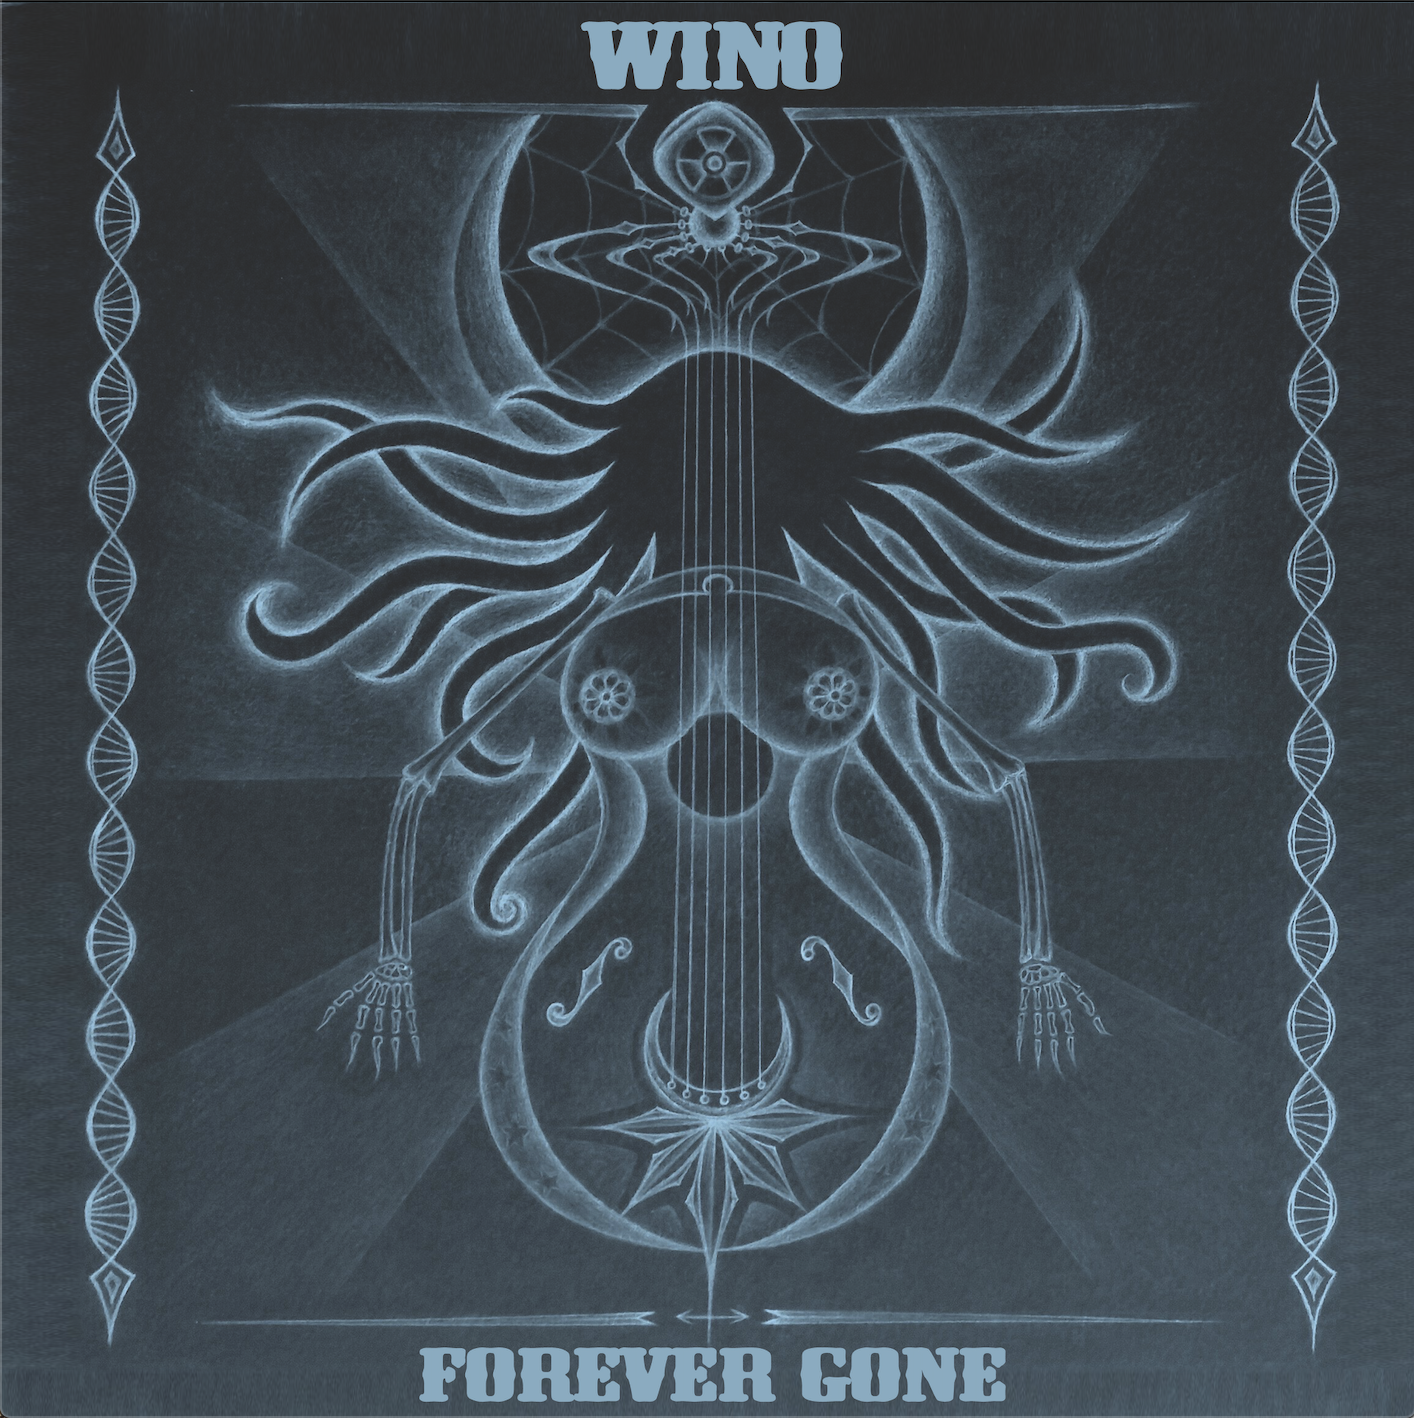 WINO: new song "Isolation" streaming exclusively via Revolver!